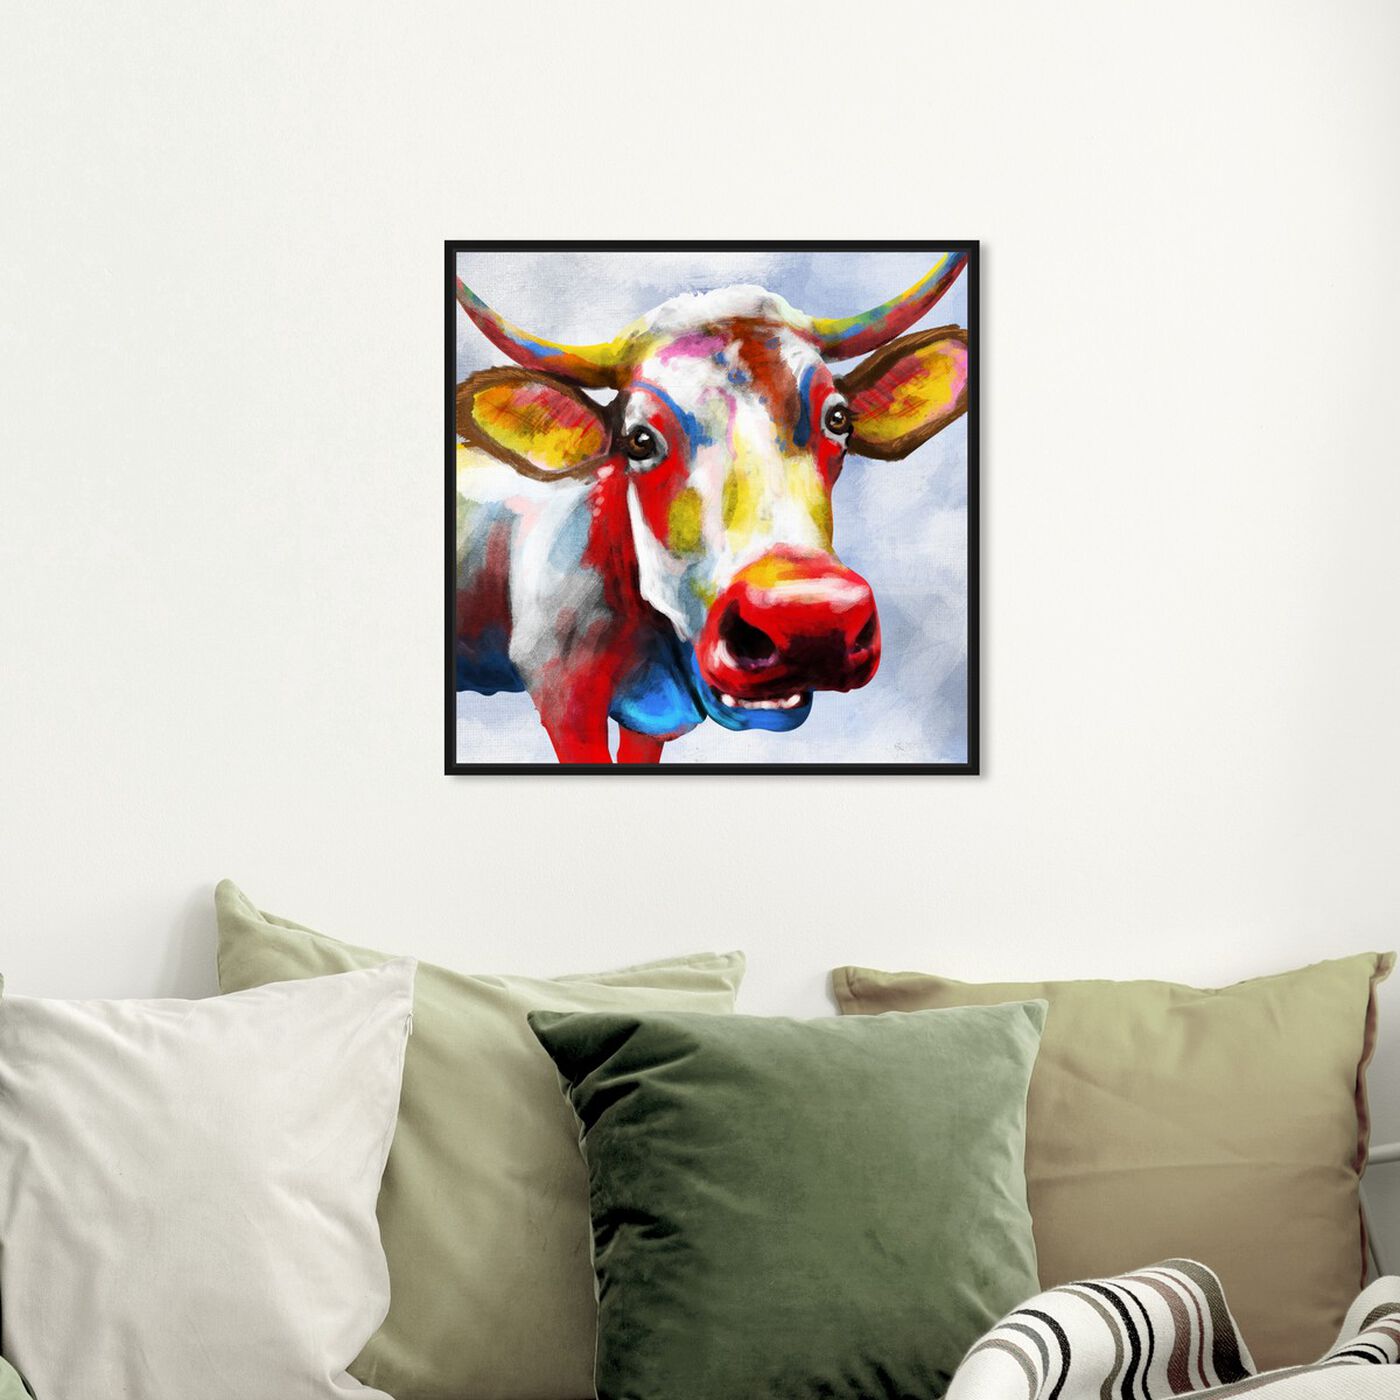 Hanging view of Color Spash Bovine featuring animals and farm animals art.